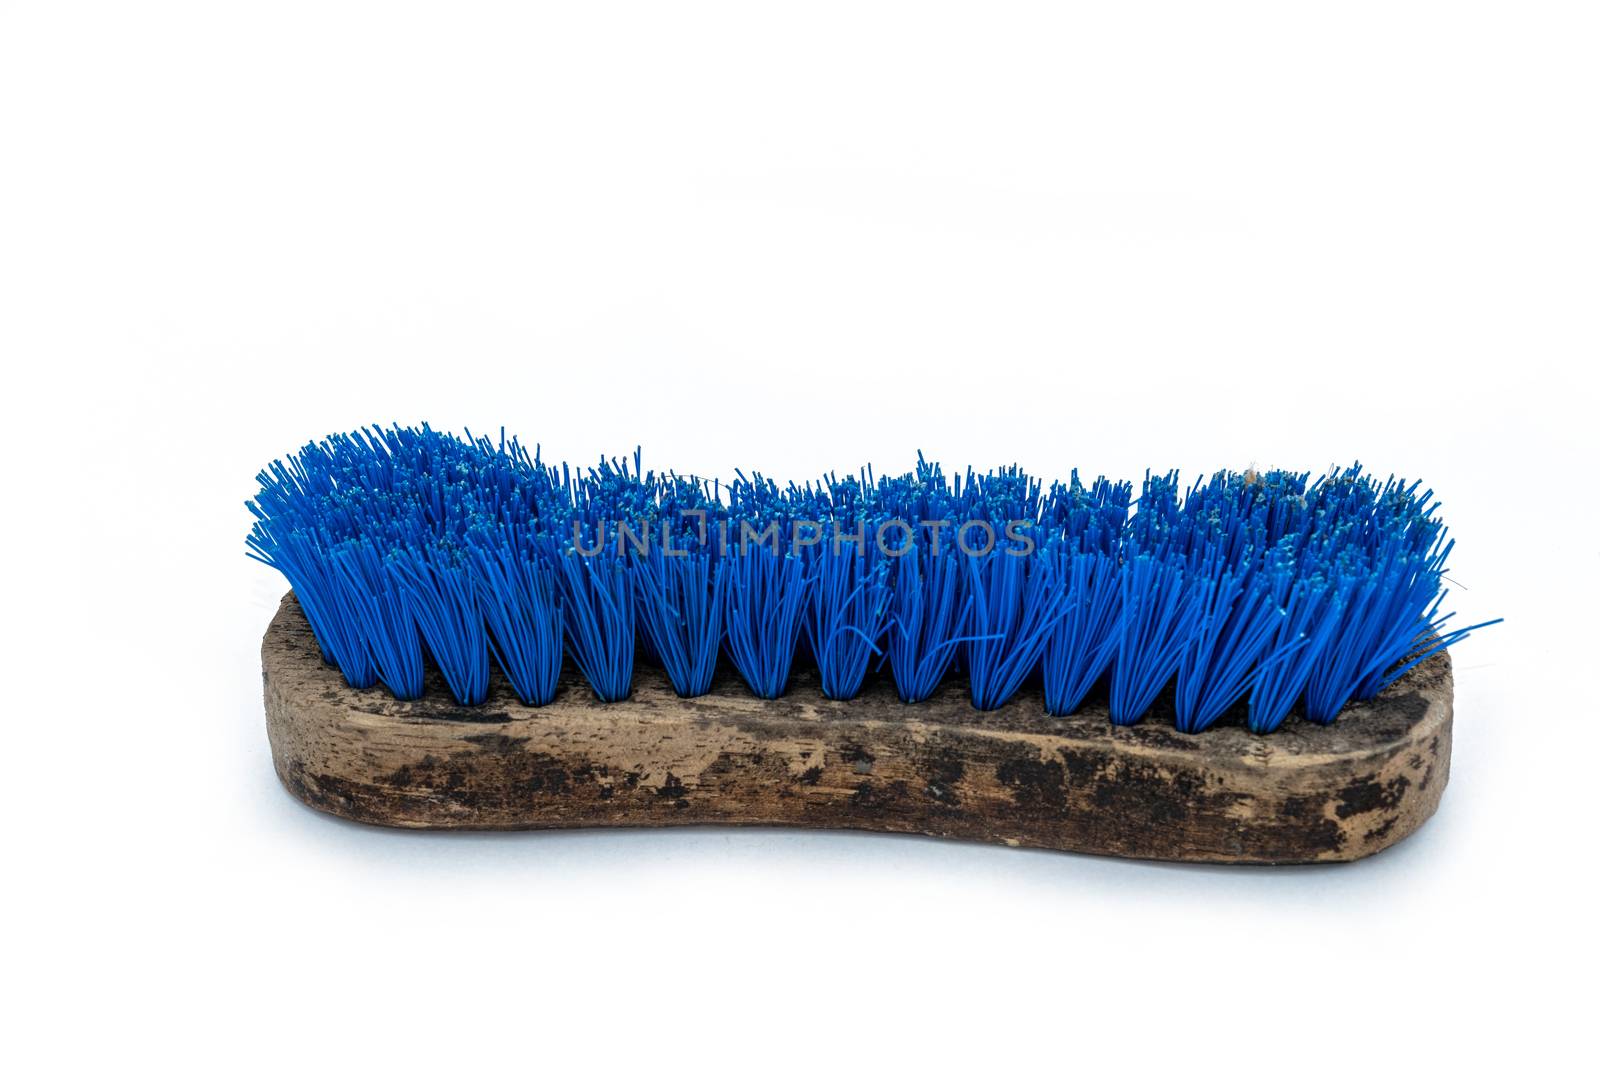 The old Blue Washing brush with wooden handle on white background.